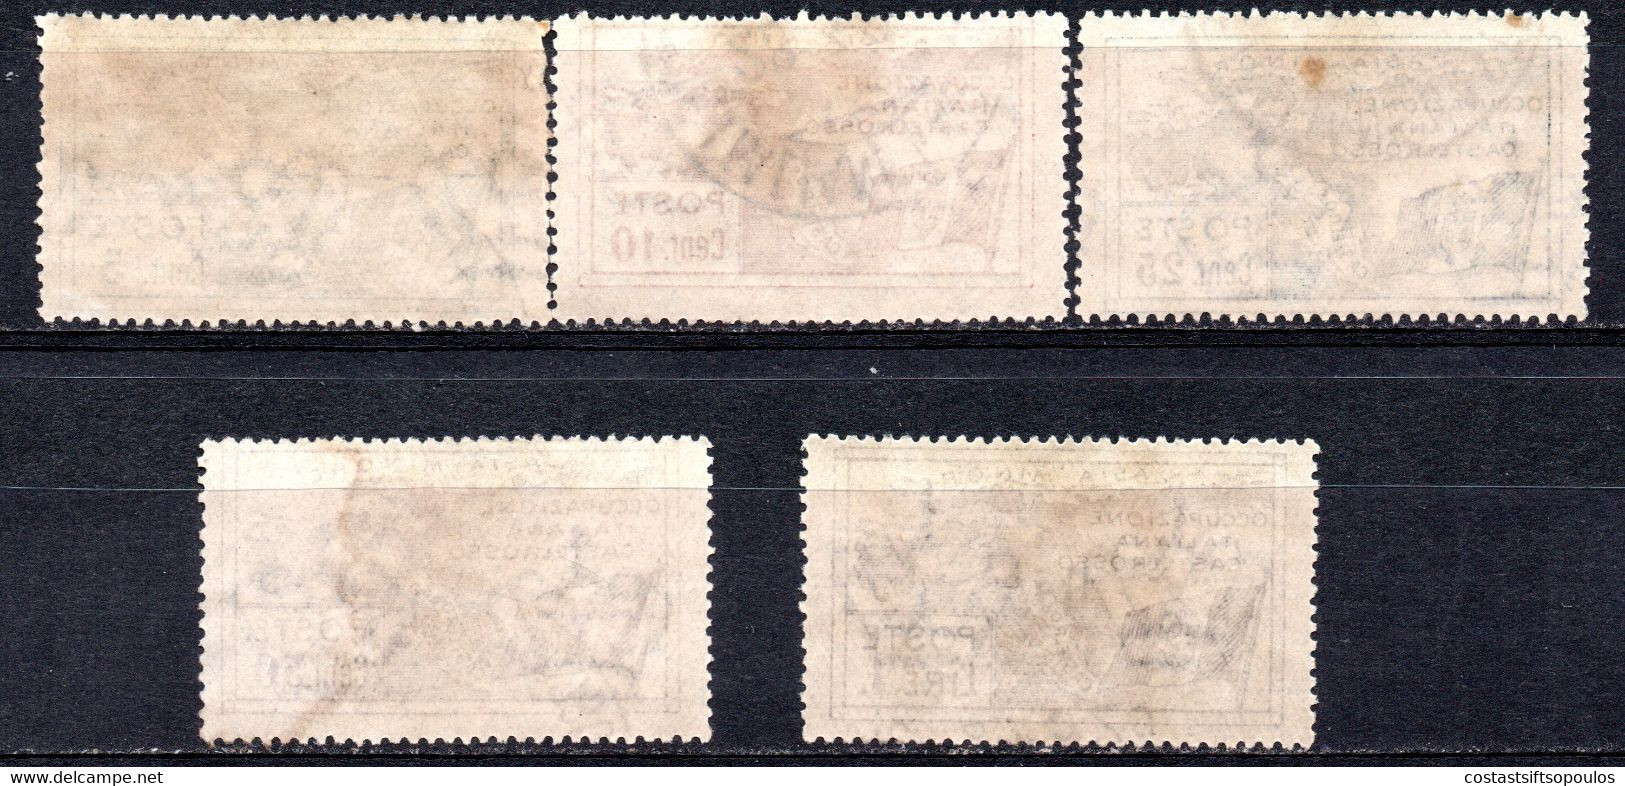 1441.GREECE,ITALY, DODECANESE.KASTELLORIZO,CASTELROSSO. 1923 HELLAS 26-30.FREE SHIPPING BY REGISTERED MAIL. - Dodekanesos